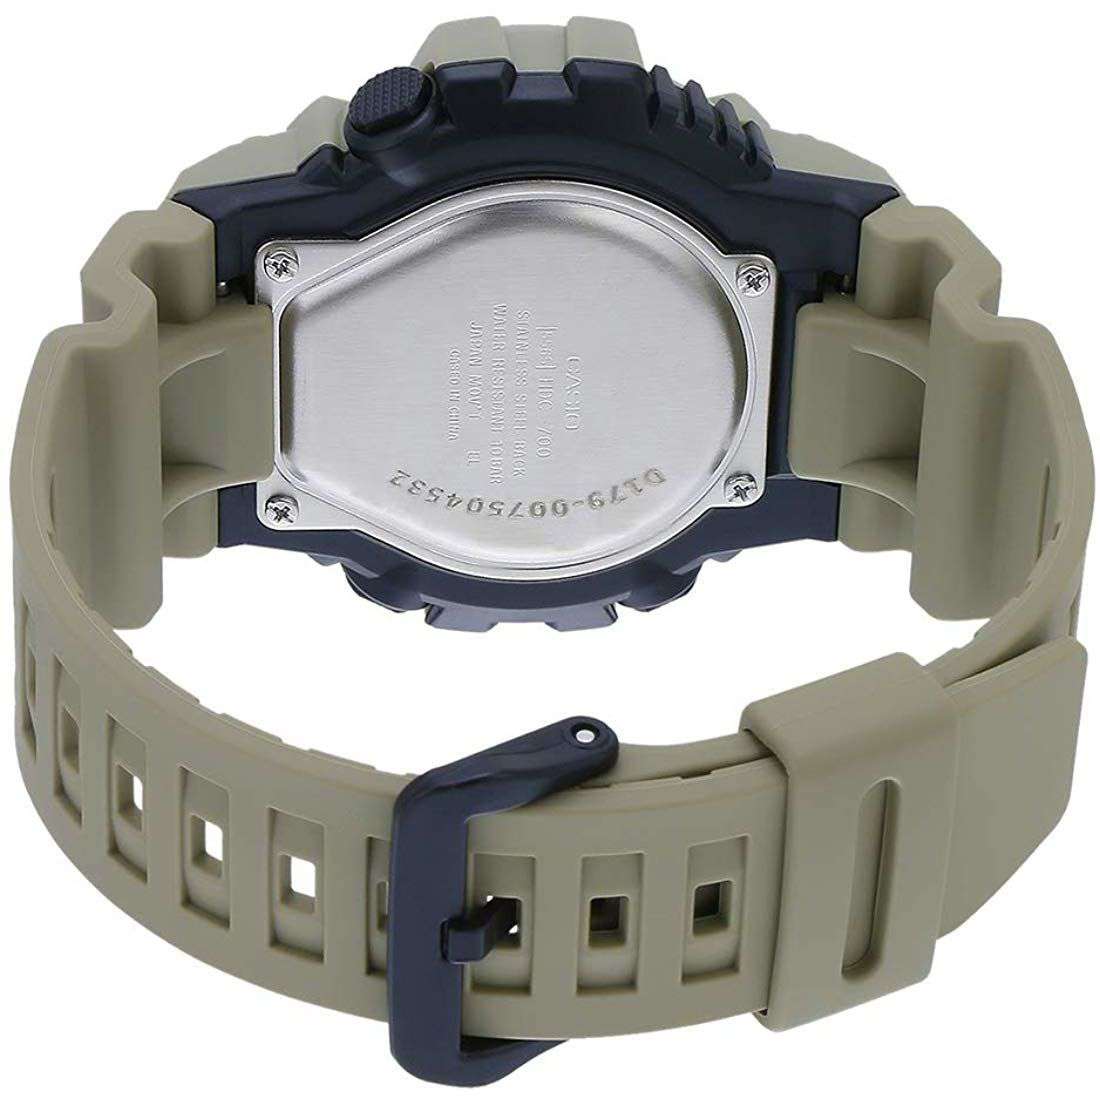 Casio HDC-700-3A3VDF Army Green Resin Watch for Men-Watch Portal Philippines